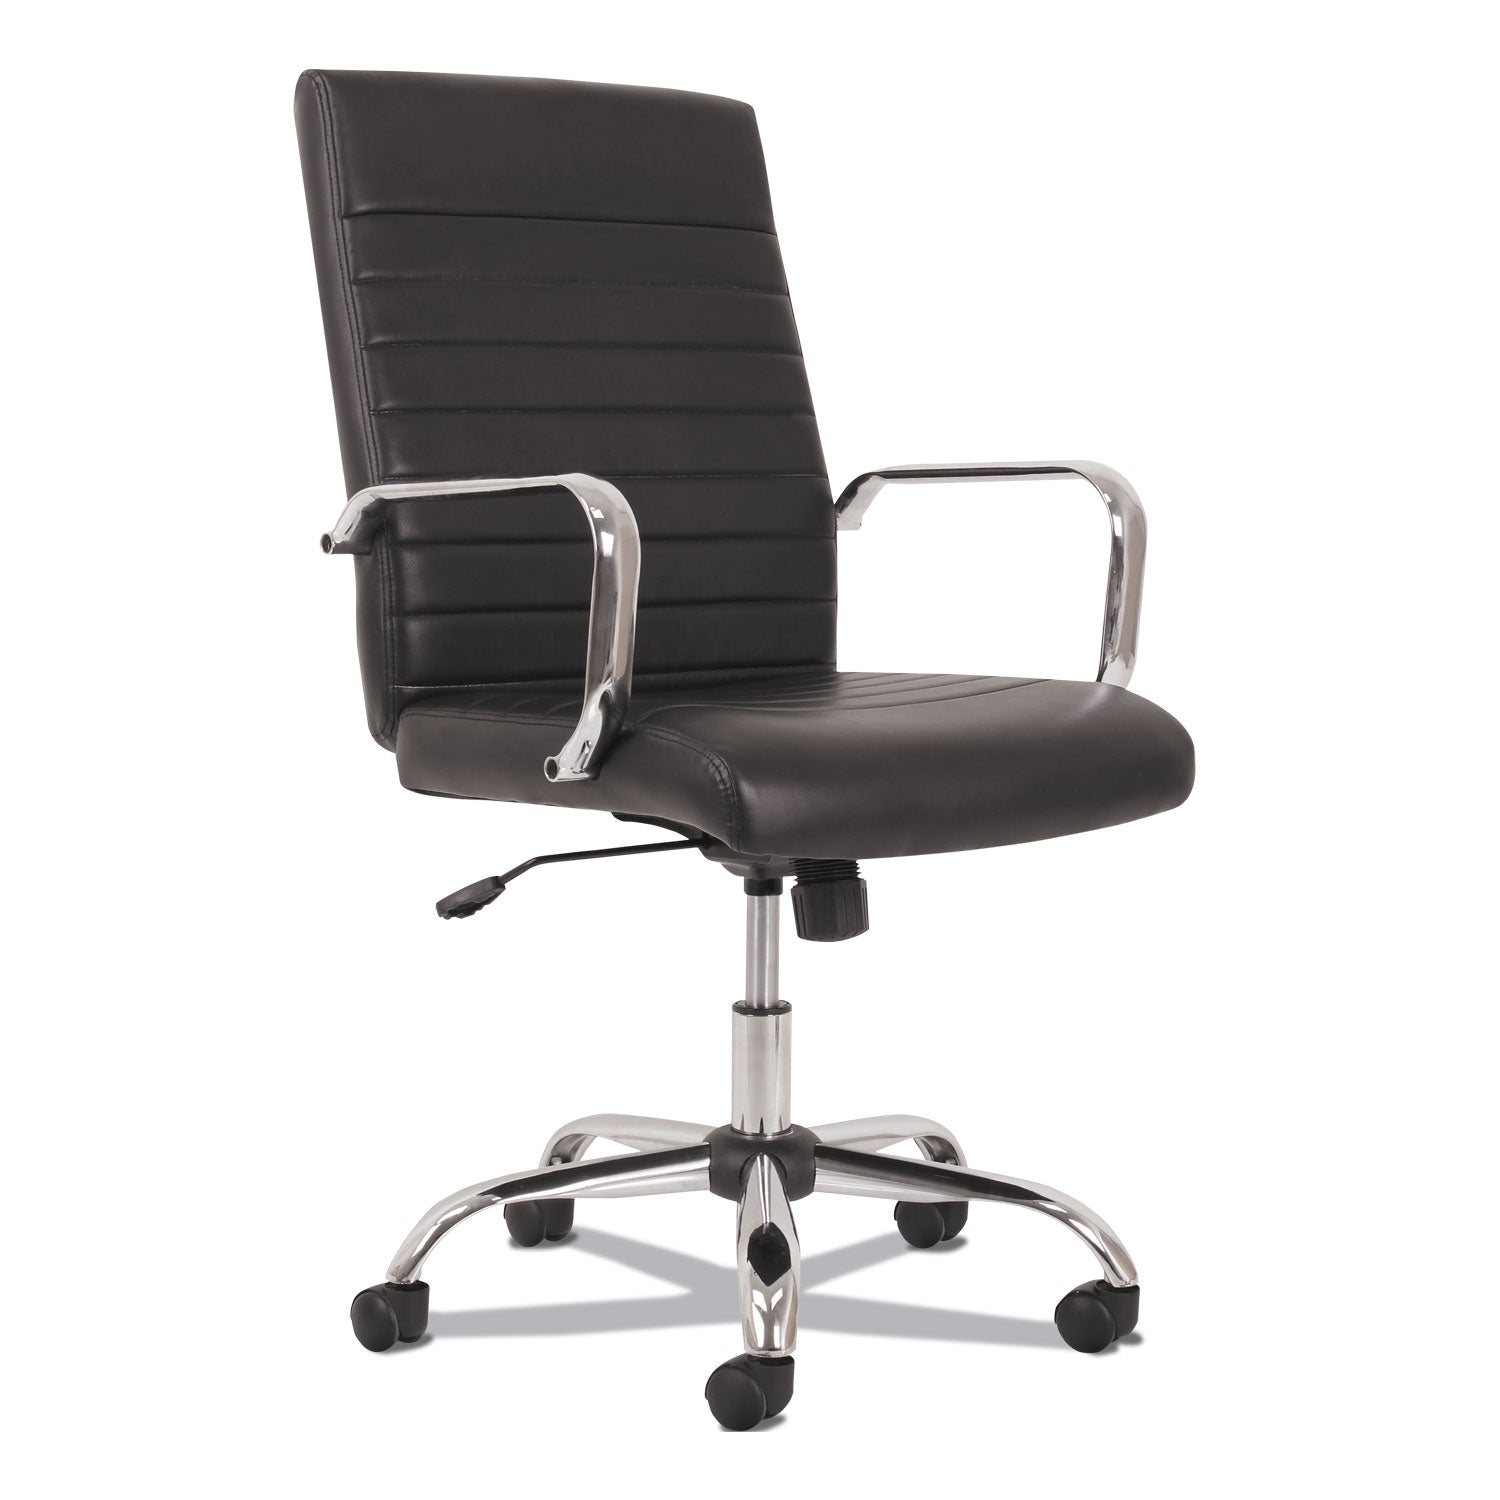 5-eleven-mid-back-executive-chair-supports-up-to-250-lb-171-to-20-seat-height-black-seat-back-chrome-base_bsxvst511 - 1